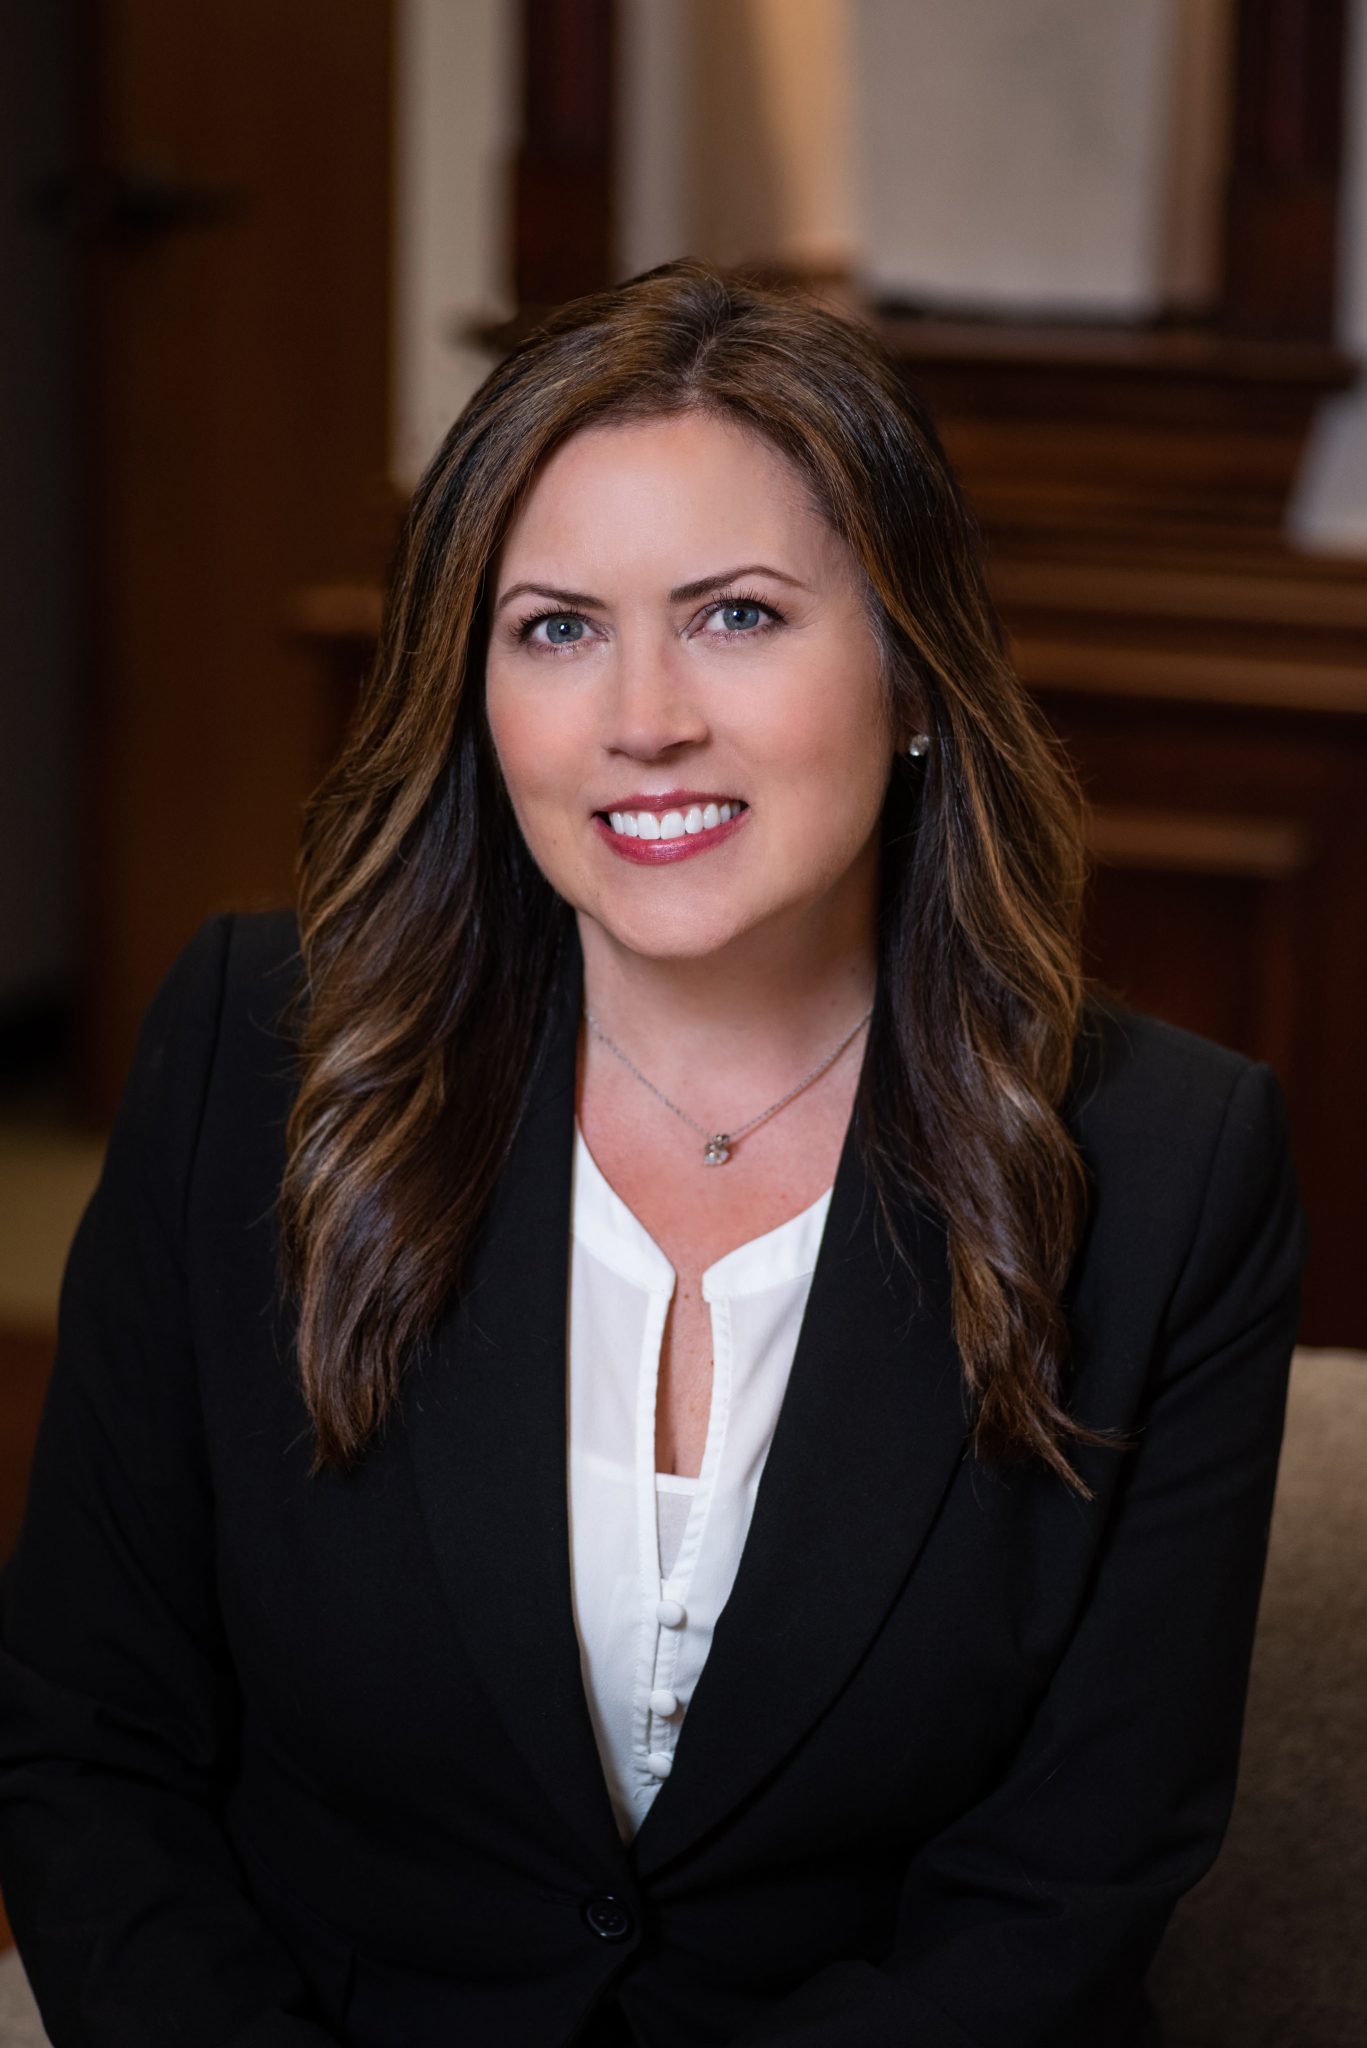 WFG NATIONAL TITLE INSURANCE COMPANY PROMOTES SUZANNE TINSLEY TO SVP ...